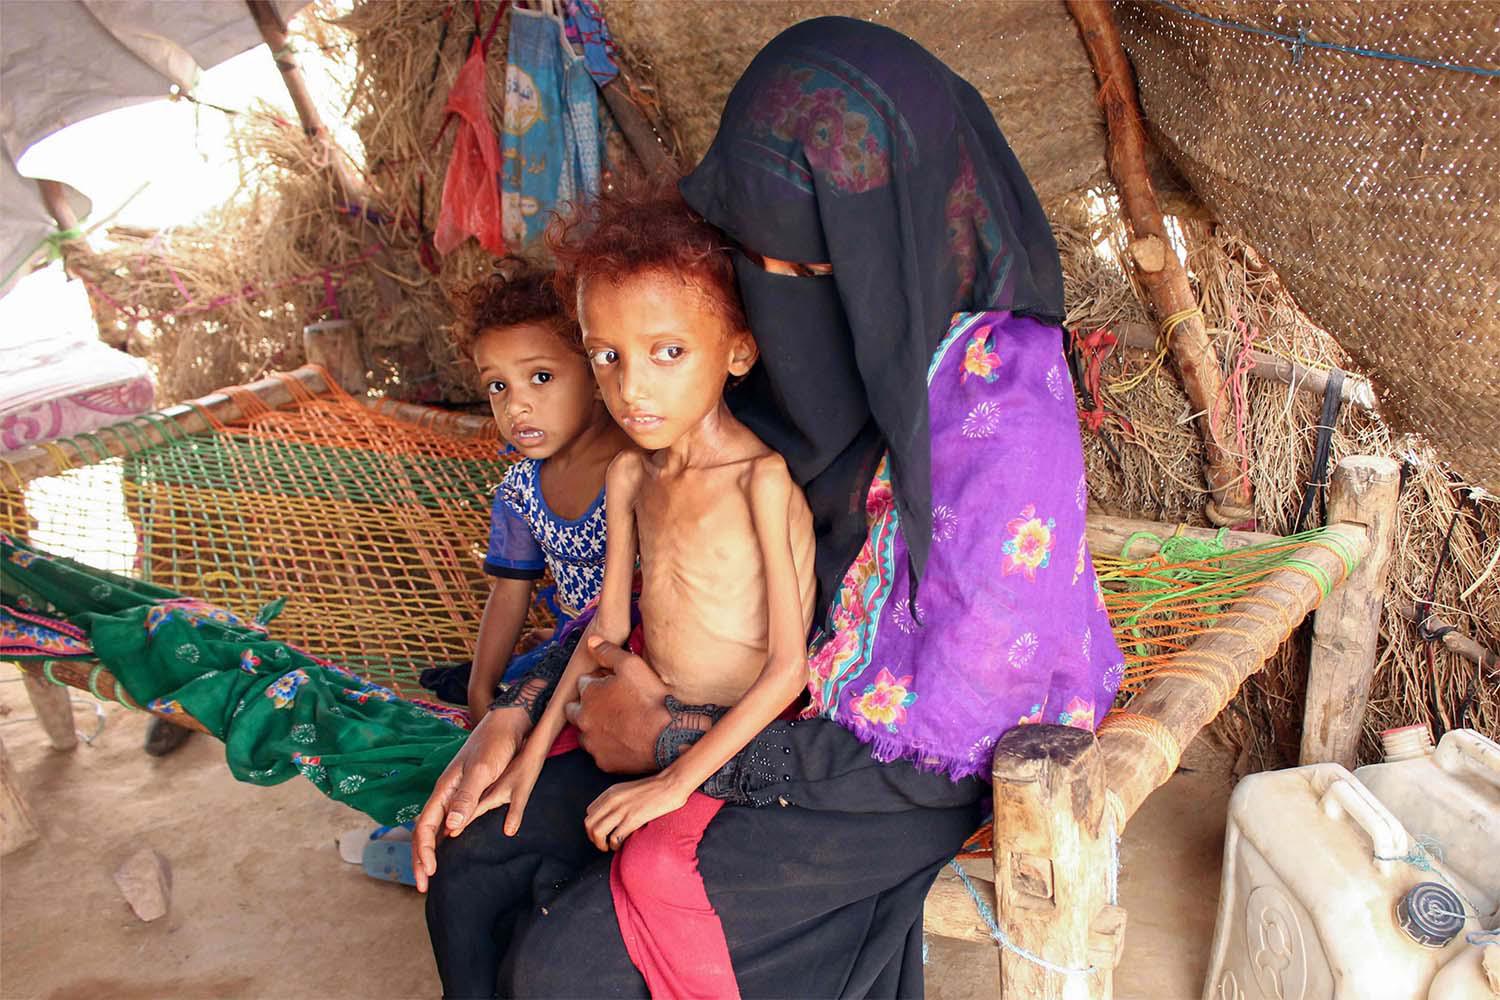 Some half a million Yemenis living in famine-like conditions